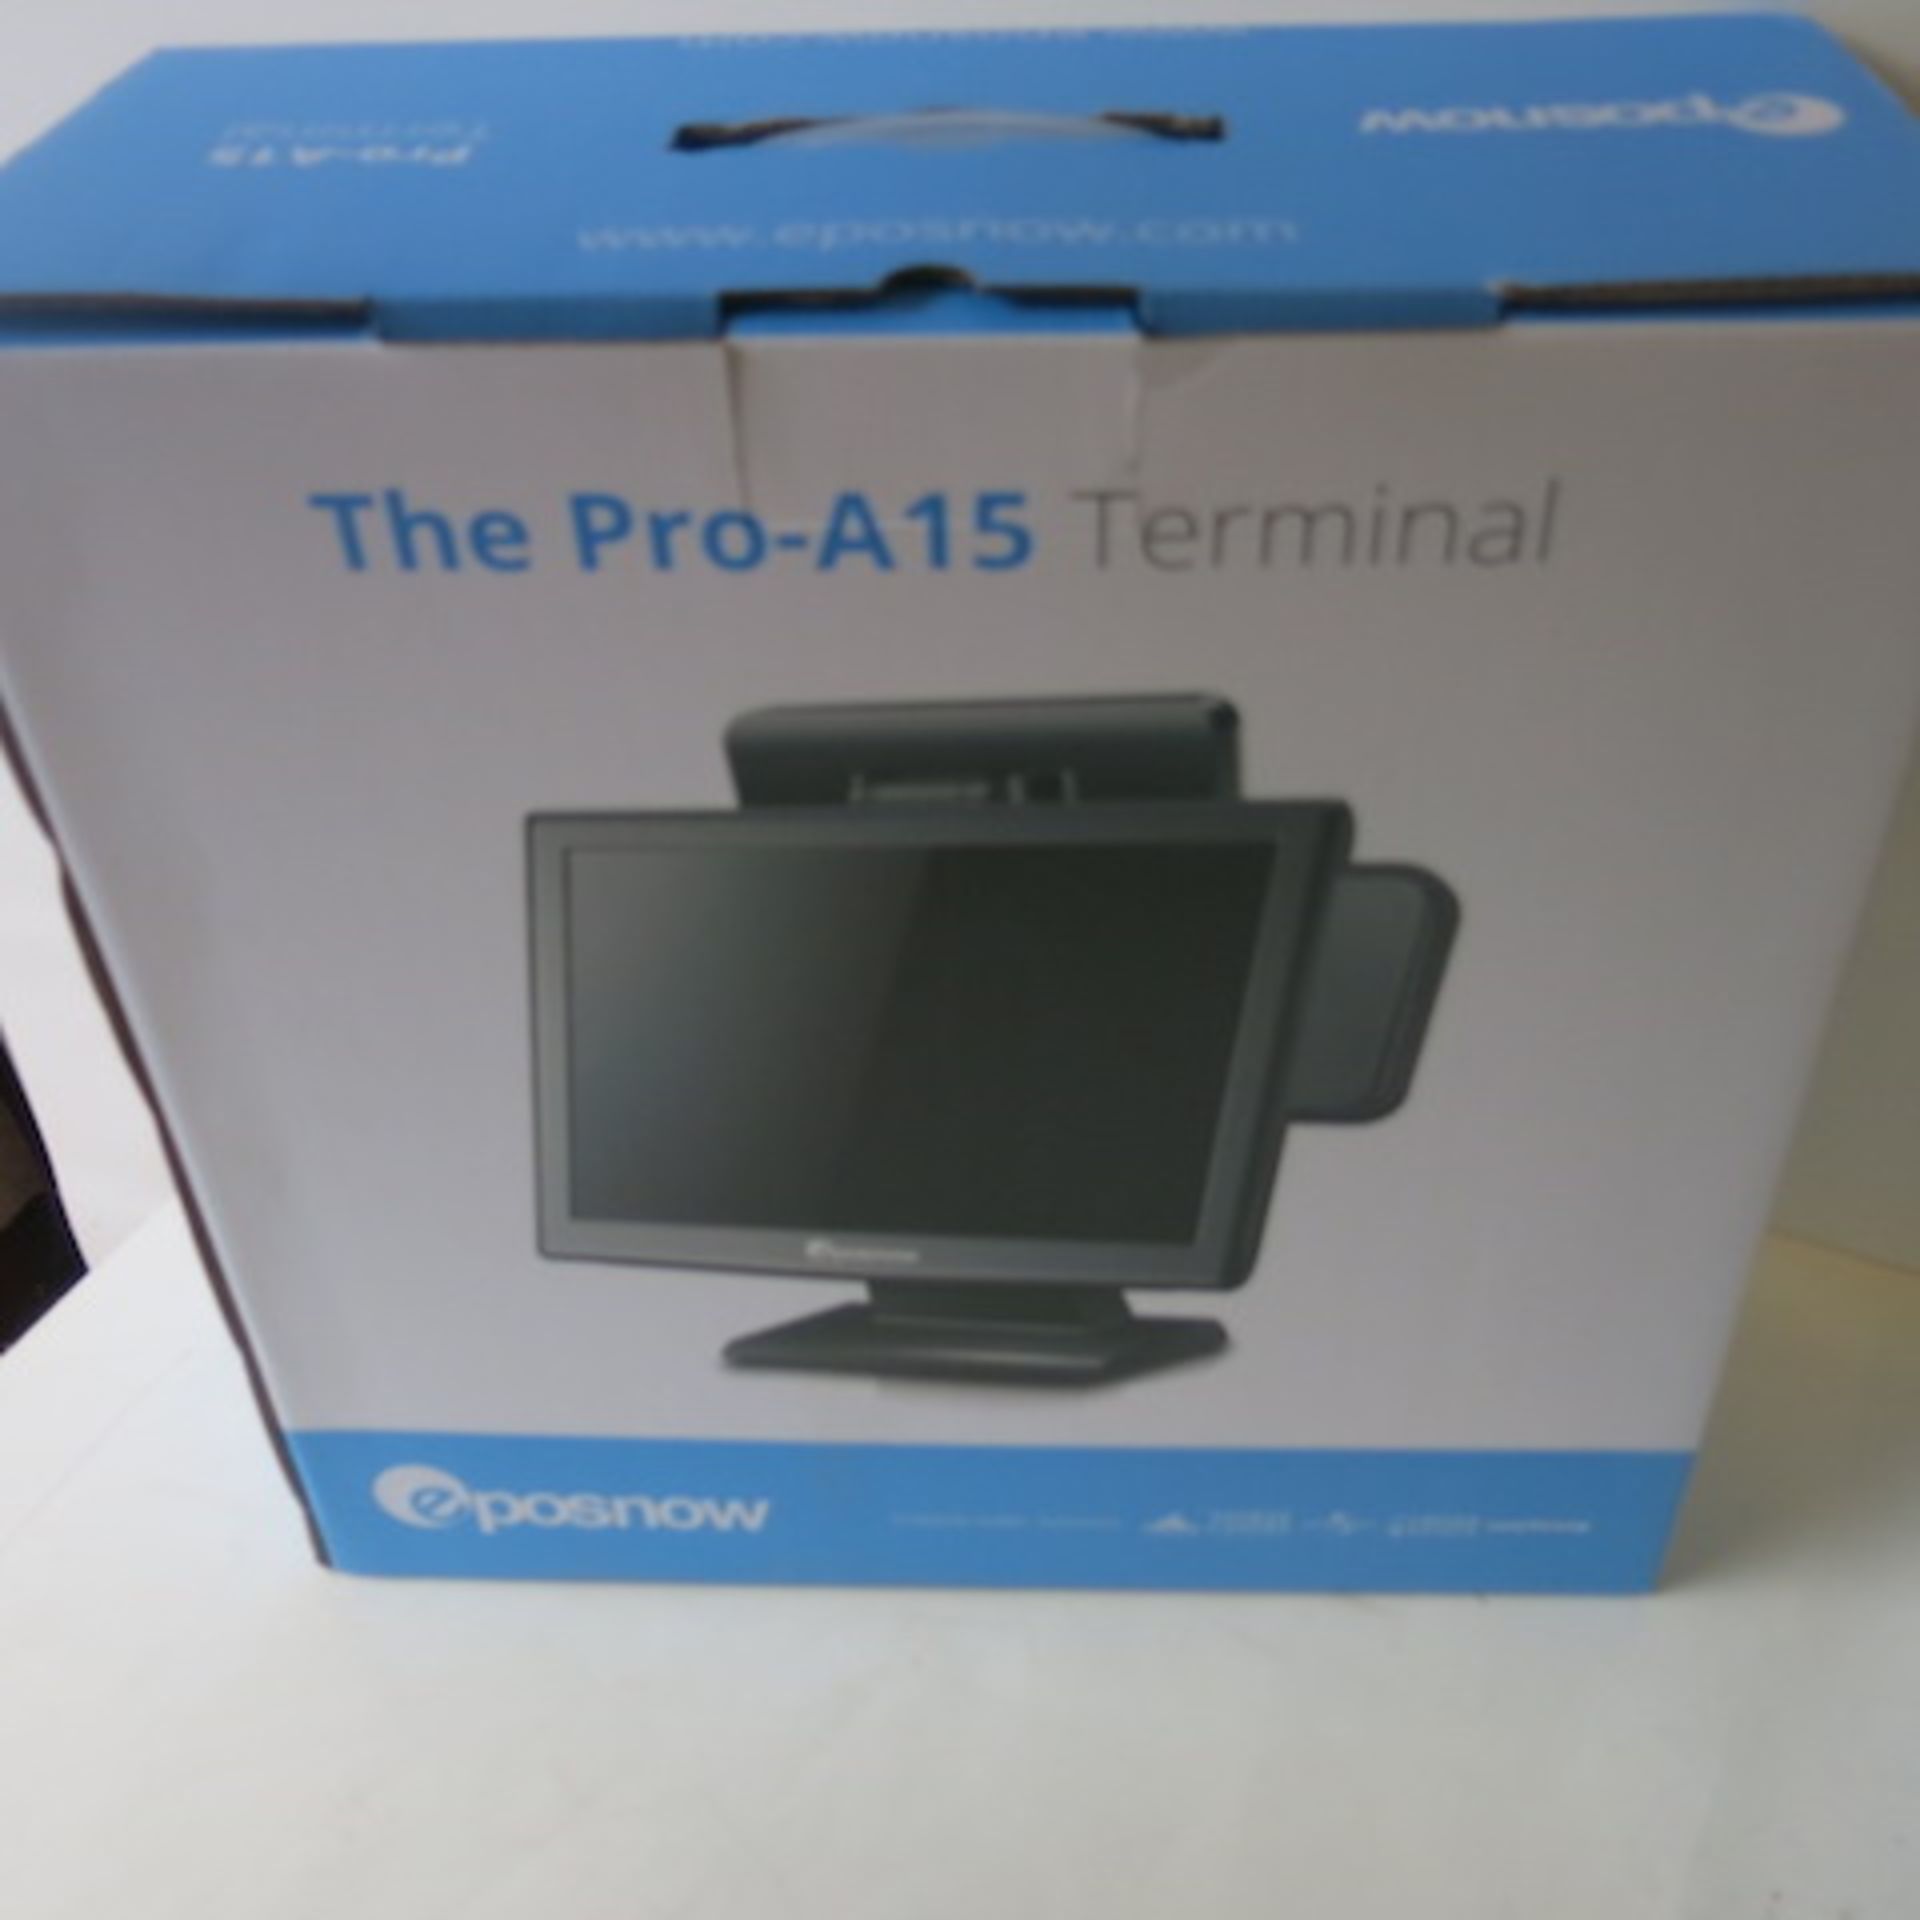 EposNow The Pro-A15 Touch Screen Terminal. Comes with Cash Drawer & Thermal Printer in Original - Image 3 of 12